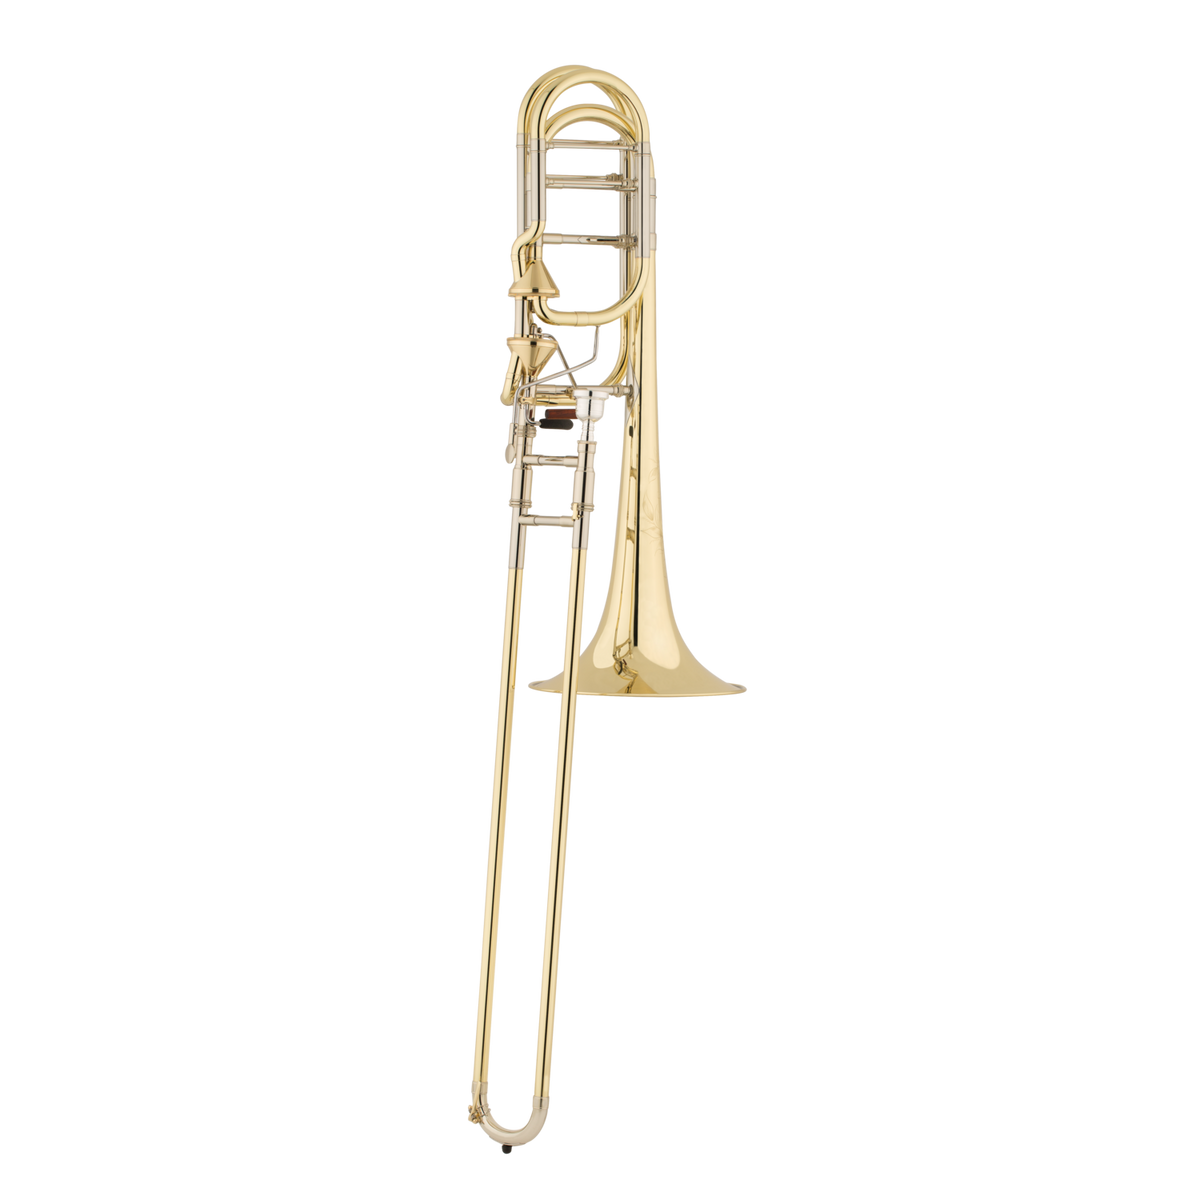 S.E. Shires - George Curran Artist Model Bass Trombone with Axial Flow F/Gb Attachment-Trombone-S.E. Shires-Music Elements